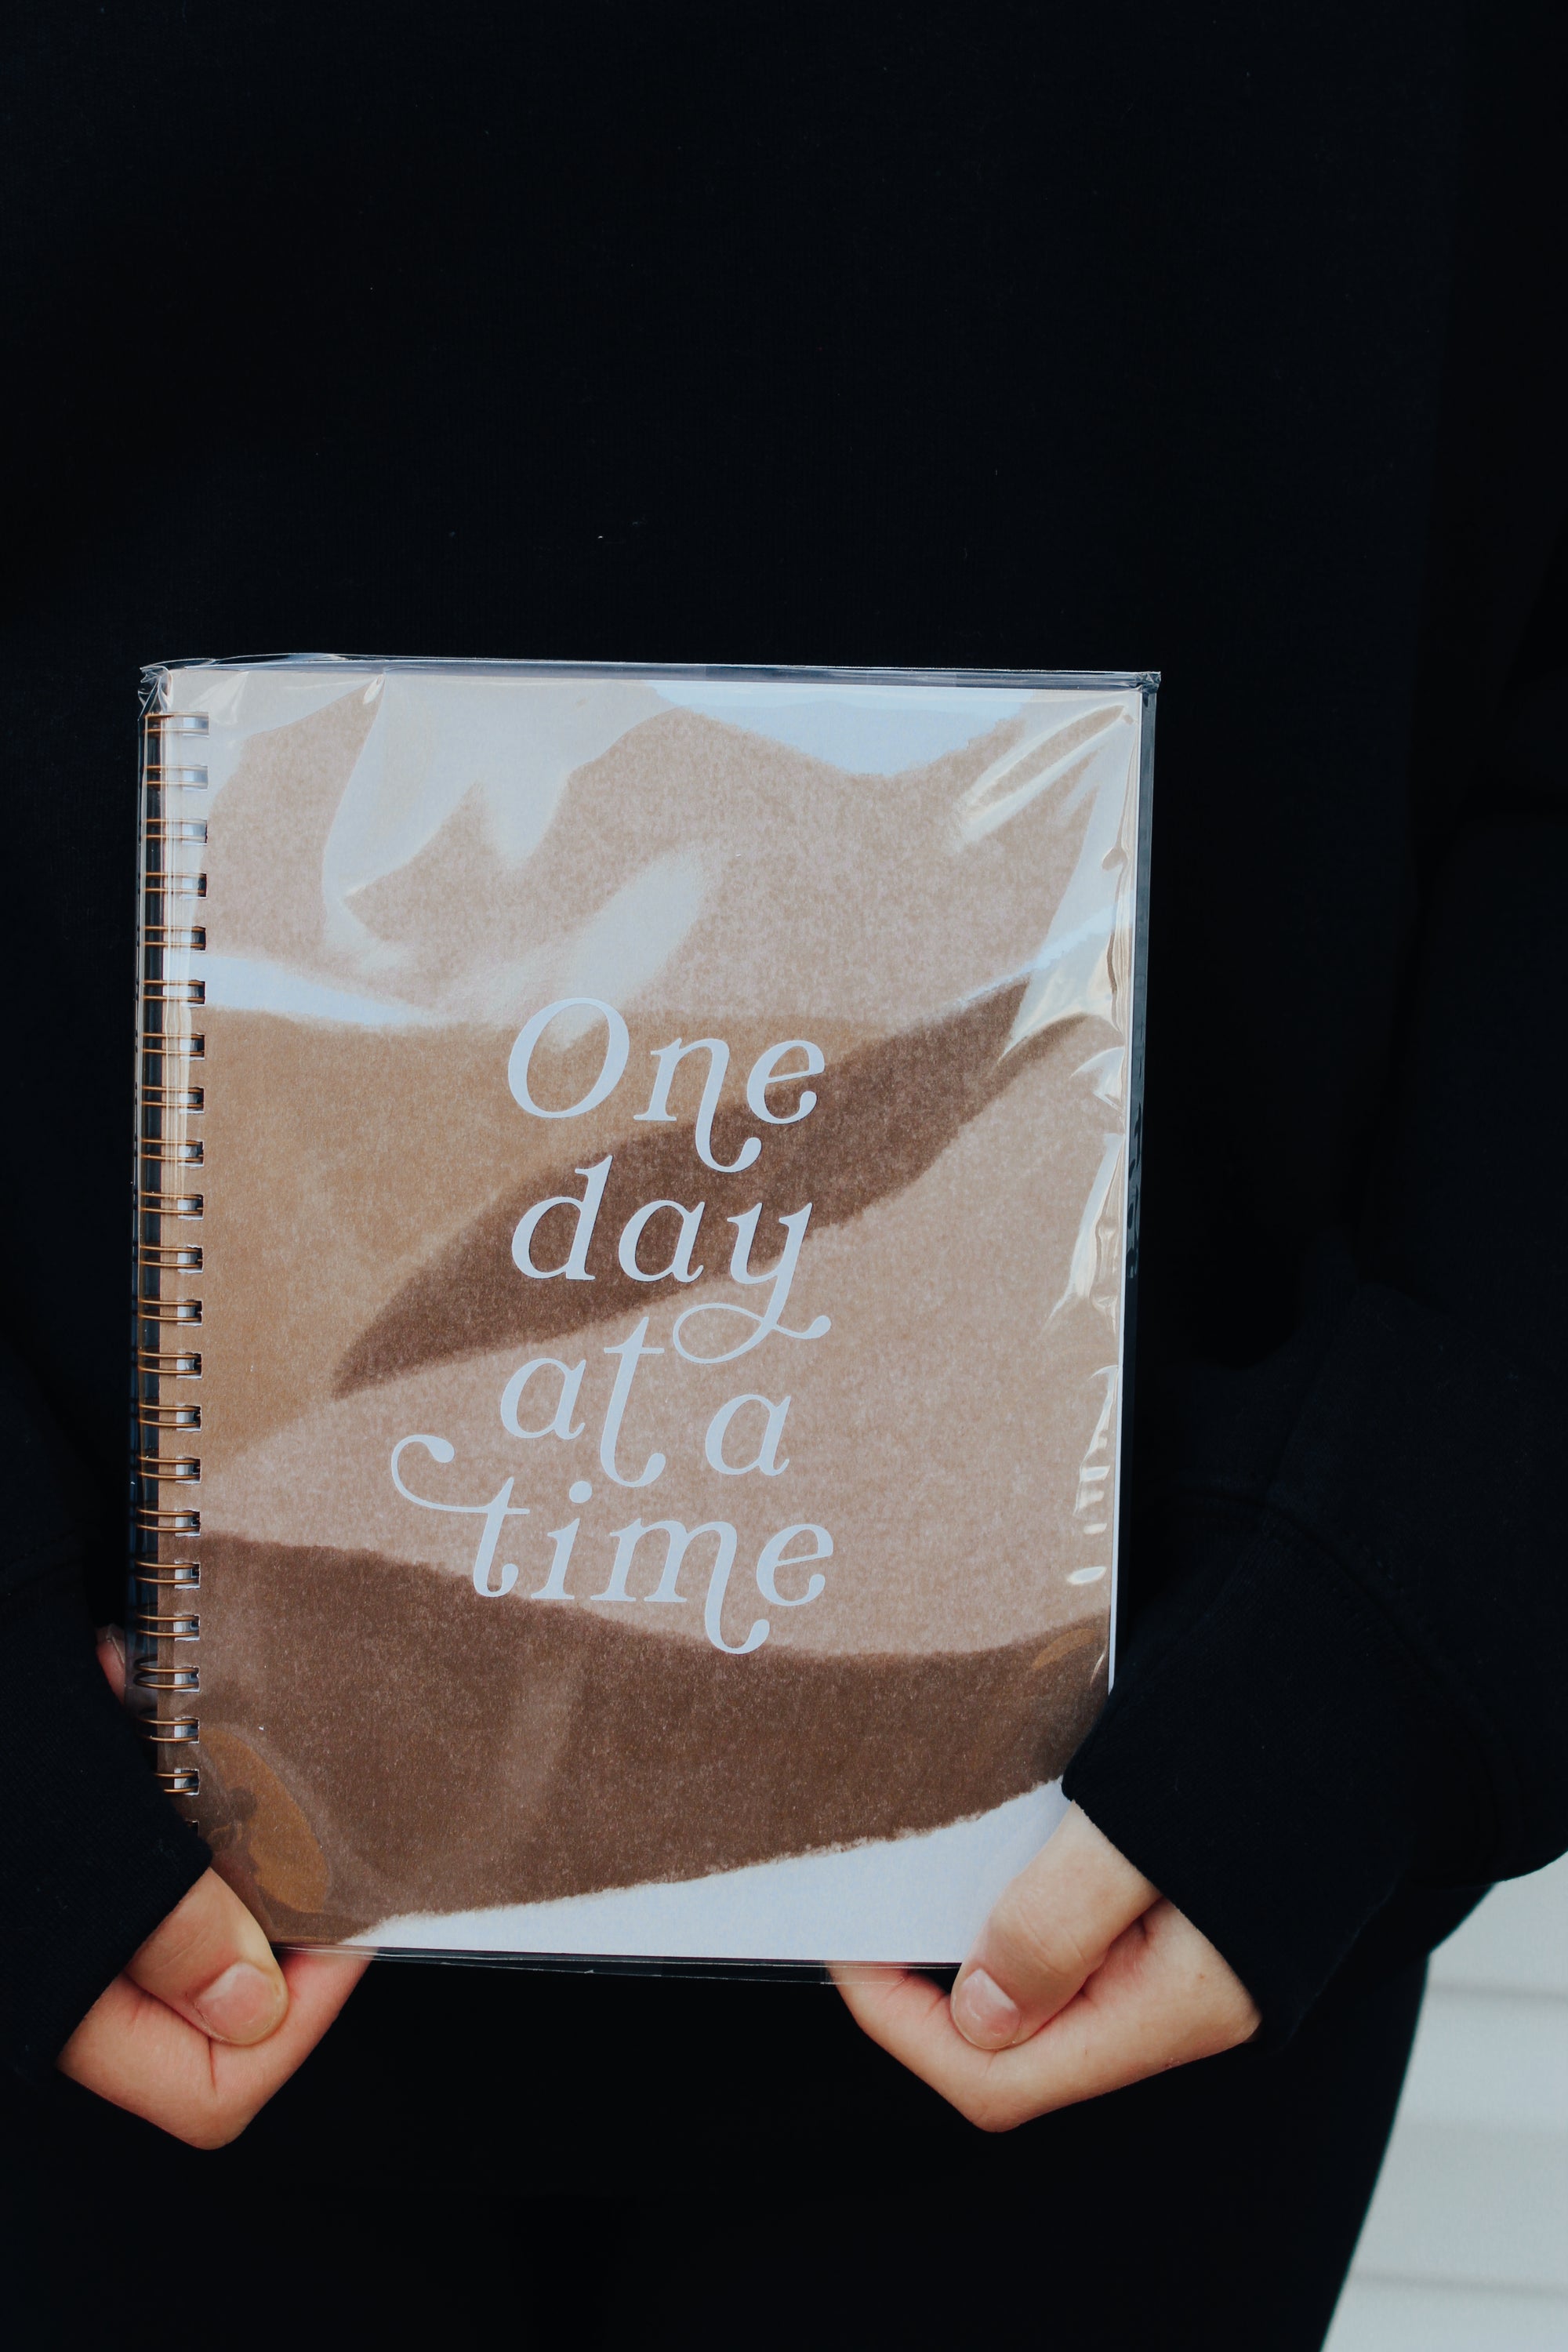 One Day at a Time Journal